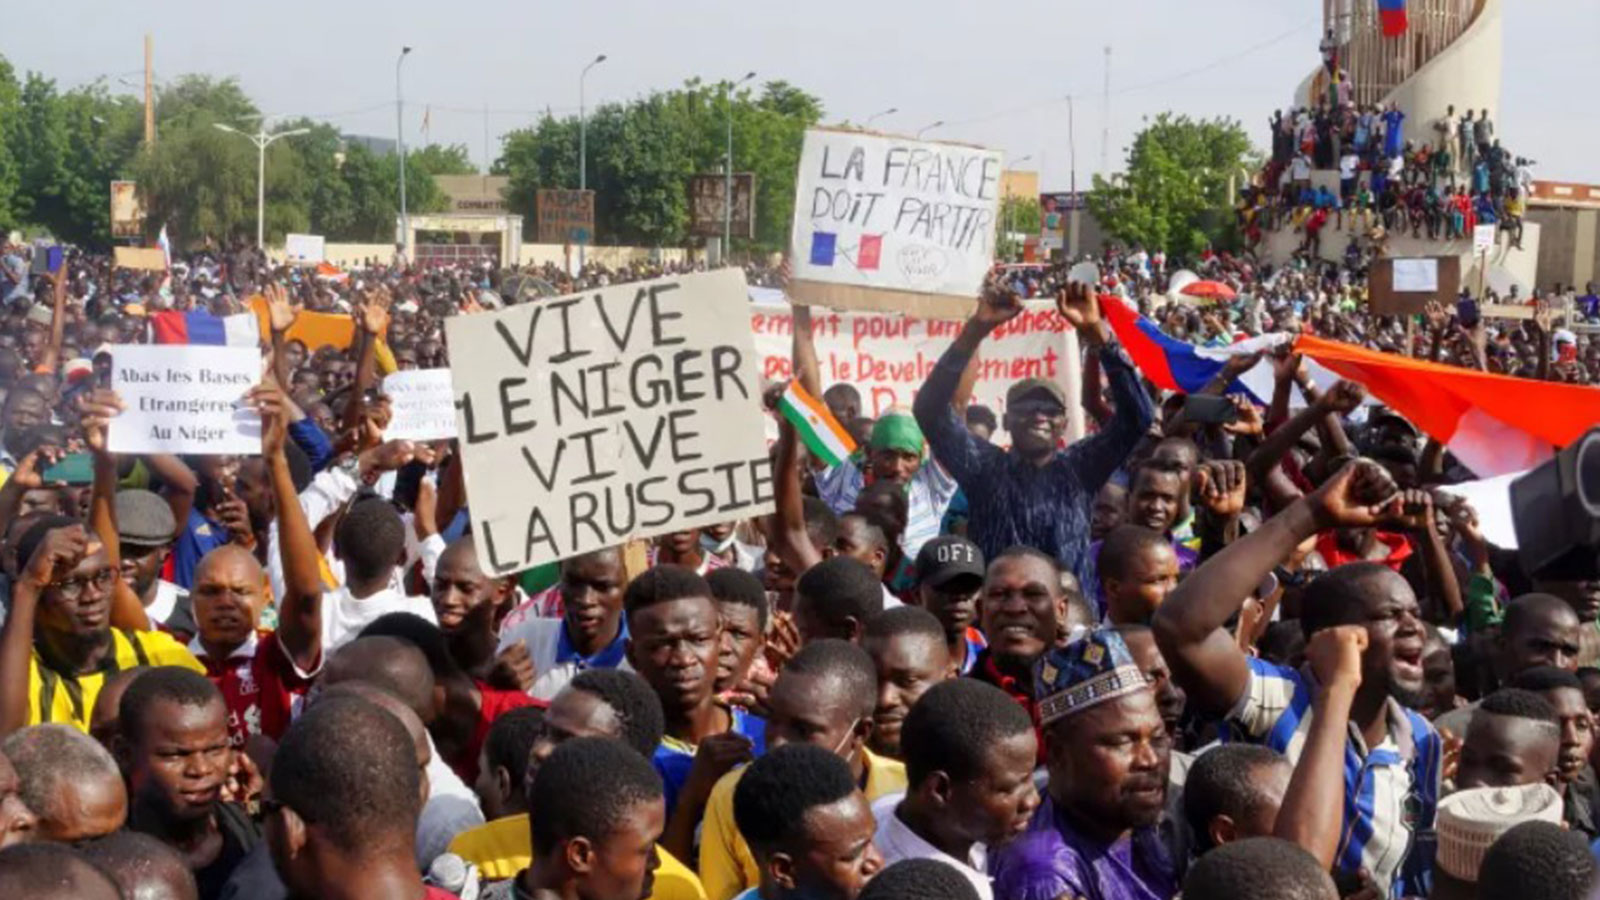 Crowd in Niamey holding signs: long live Niger, Russia. France must leave.